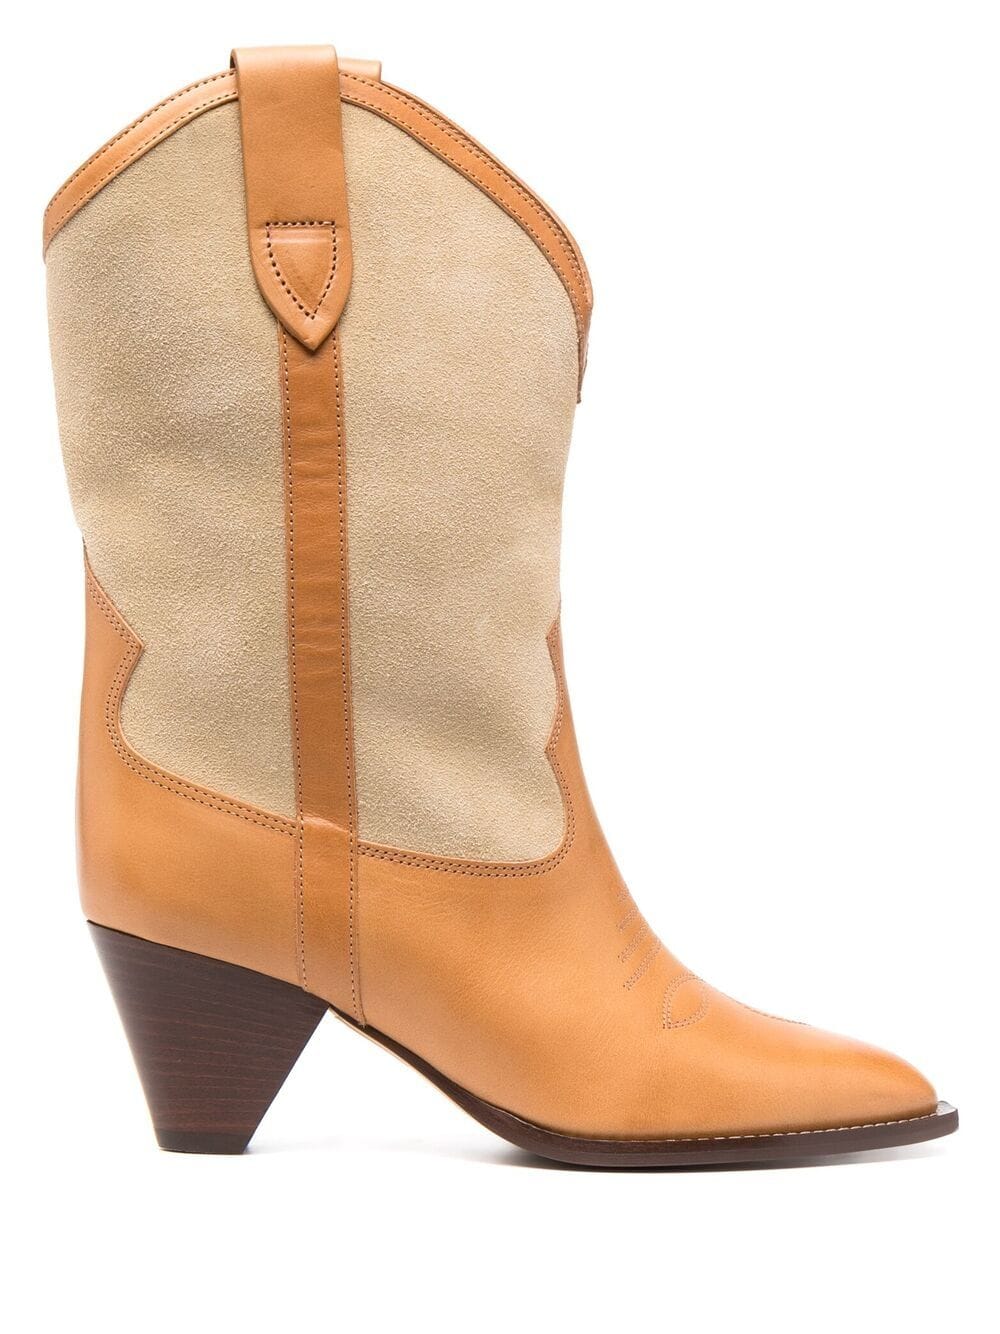 ISABEL MARANT WESTERN-STYLE MID-CALF BOOTS